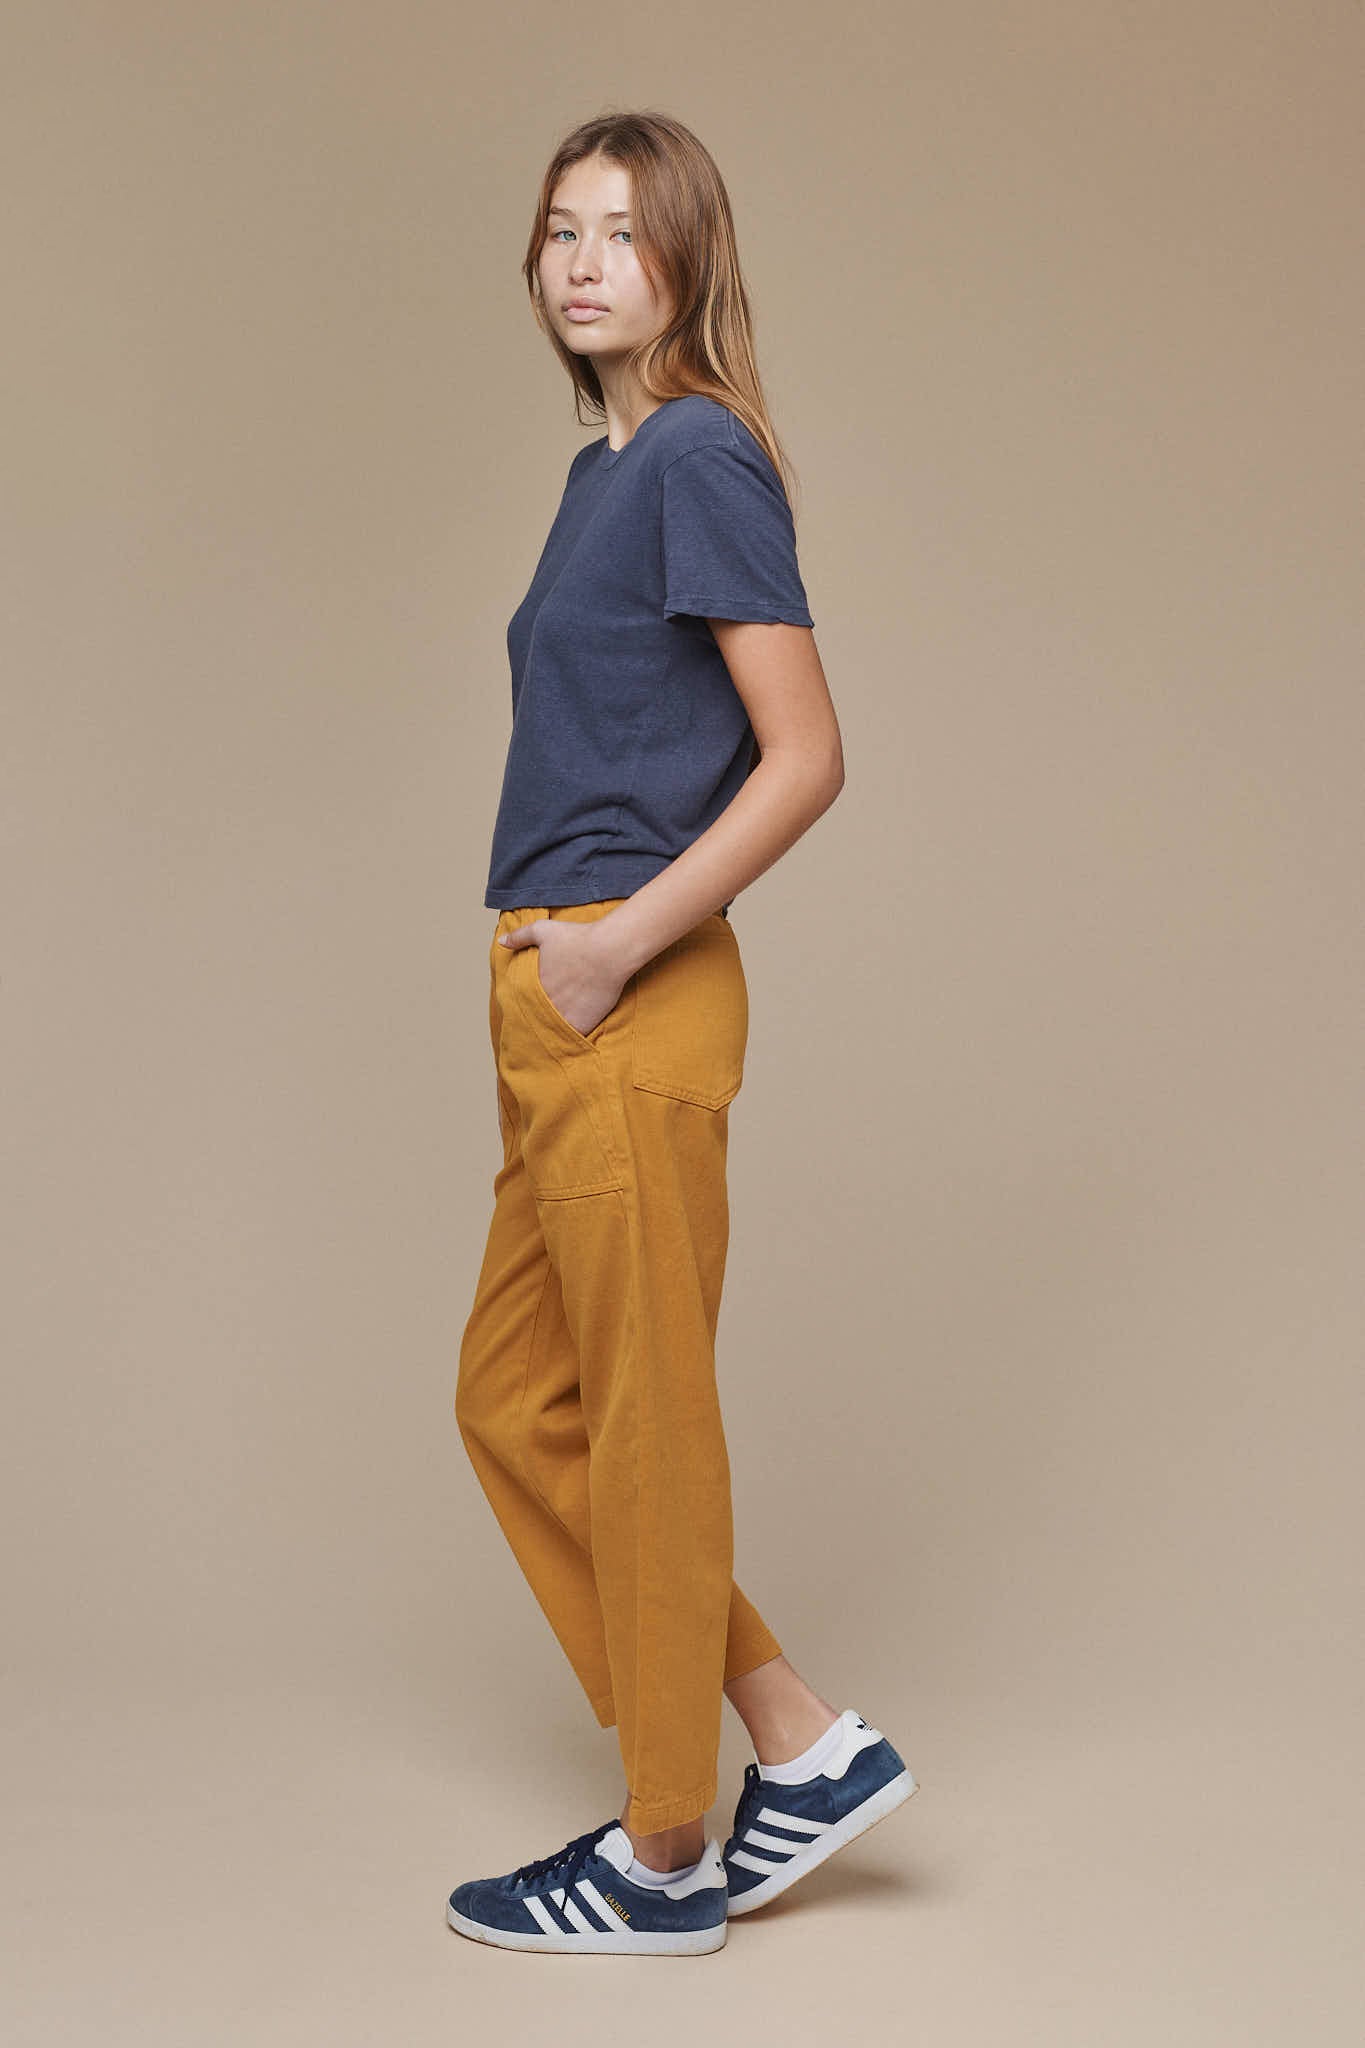 Cropped Lorel Tee | Jungmaven Hemp Clothing & Accessories / Color: